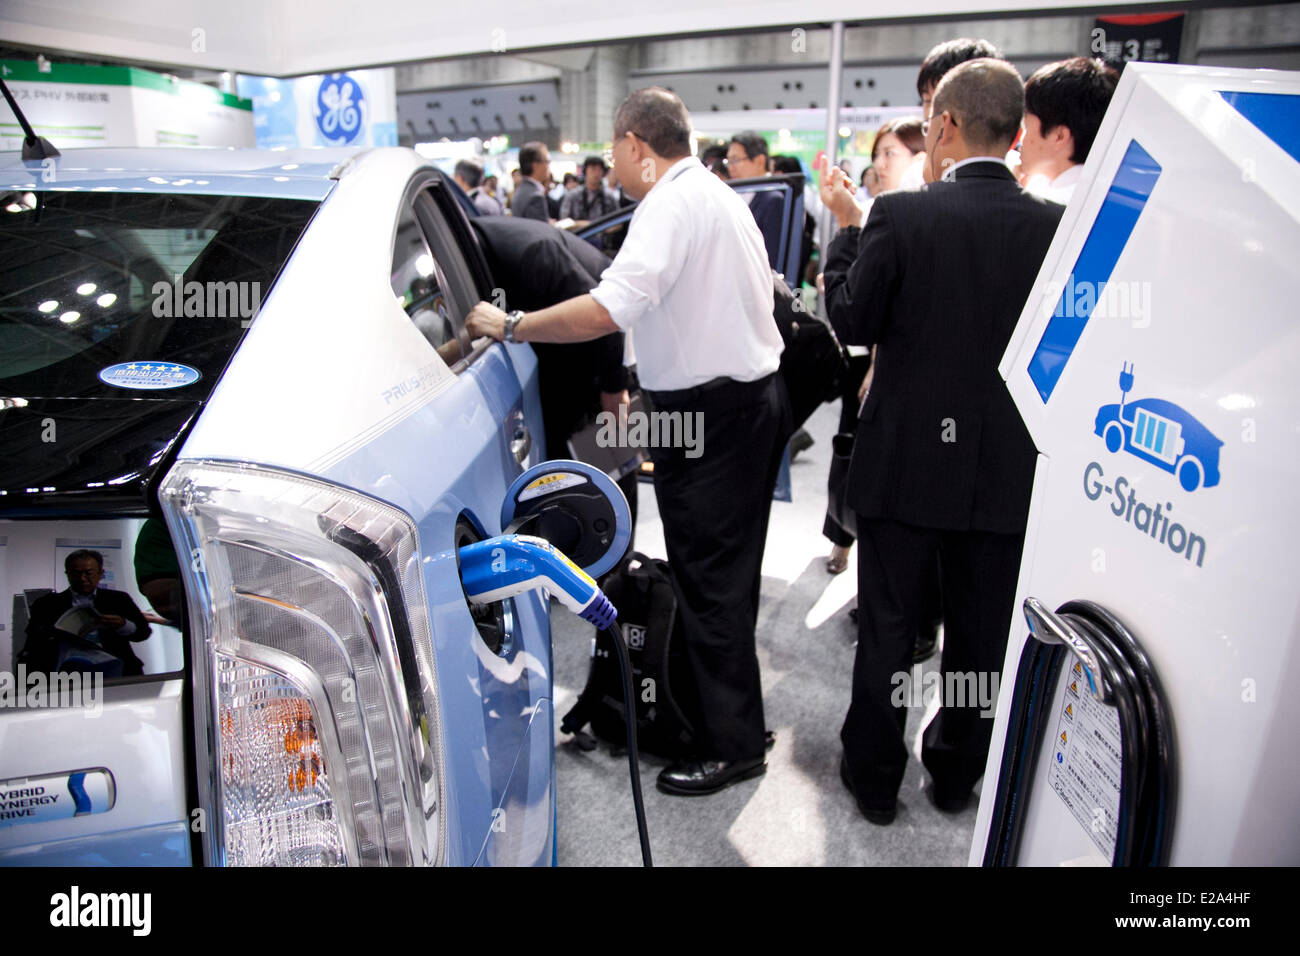 Tokyo, Japan. 18th June, 2014. – The Toyota Prius PHV (Plug-in Hybrid Vehicle) includes the new interactive navigation service 'T-Connect' which is compatible with smart phones at the Smart Community Japan 2014 in Tokyo Big Sight on June 18, 2014. The exhibition brings the latests products and technologies divided in 5 categories, 'Smart Community Exhibition', 'Biomass Expo', 'Next Generation Vehicle Exhibition, and newly-created 'Community Cloud 2014', which introduces technology for urban development. This year 229 enterprises and organizations shows their products from June 18th to 20th. (P Stock Photo